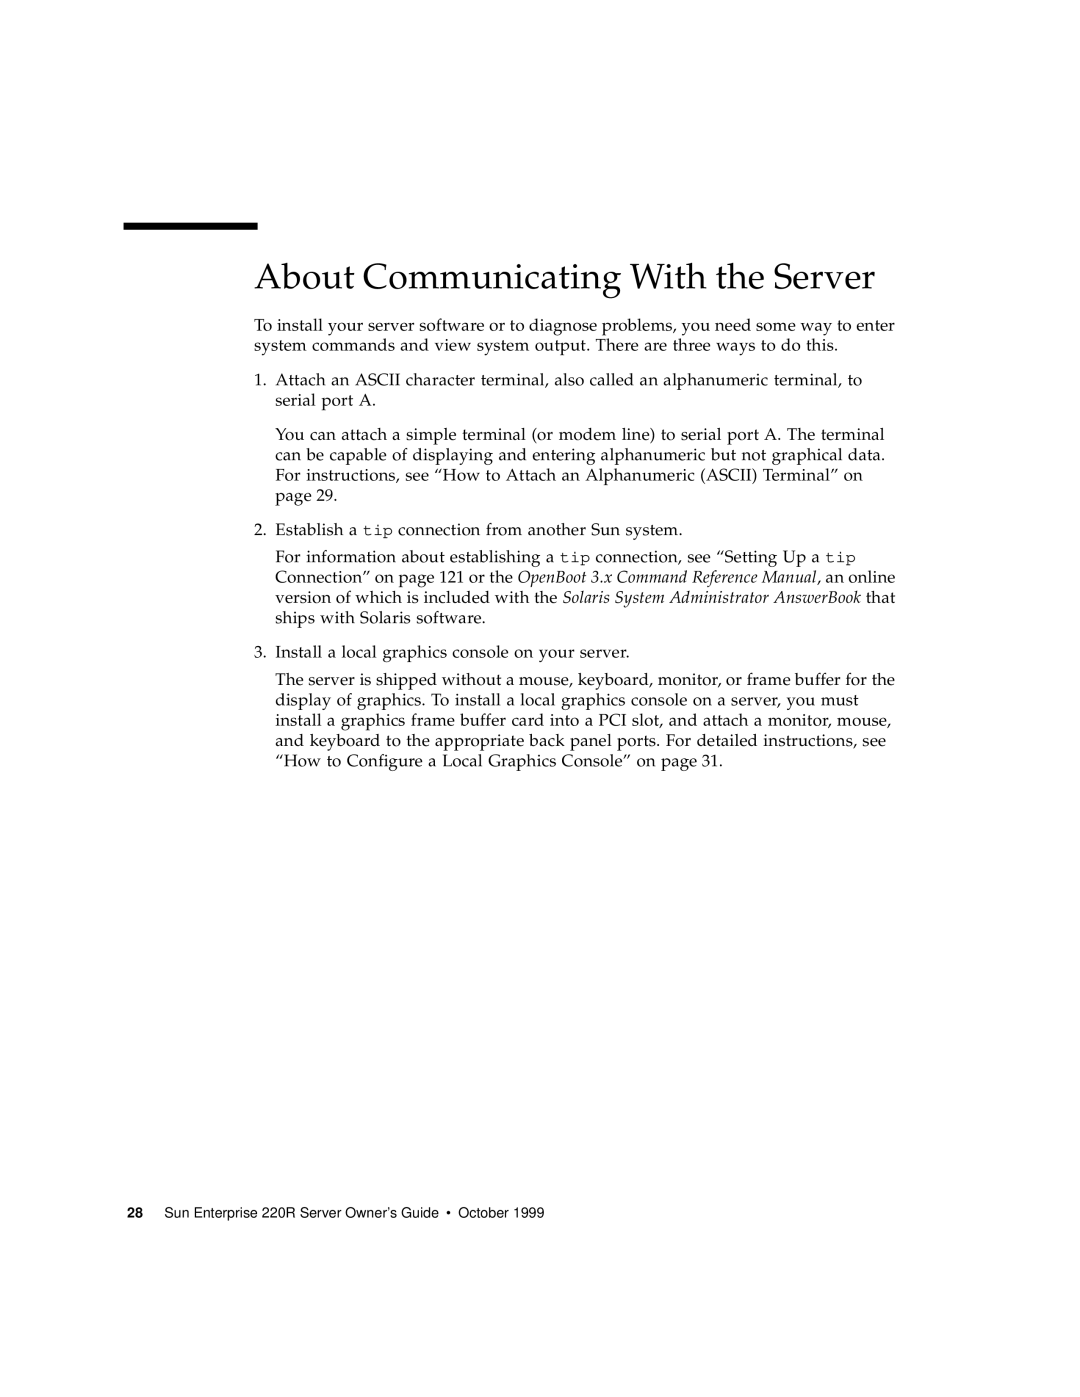 Sun Microsystems 220R manual About Communicating With the Server 